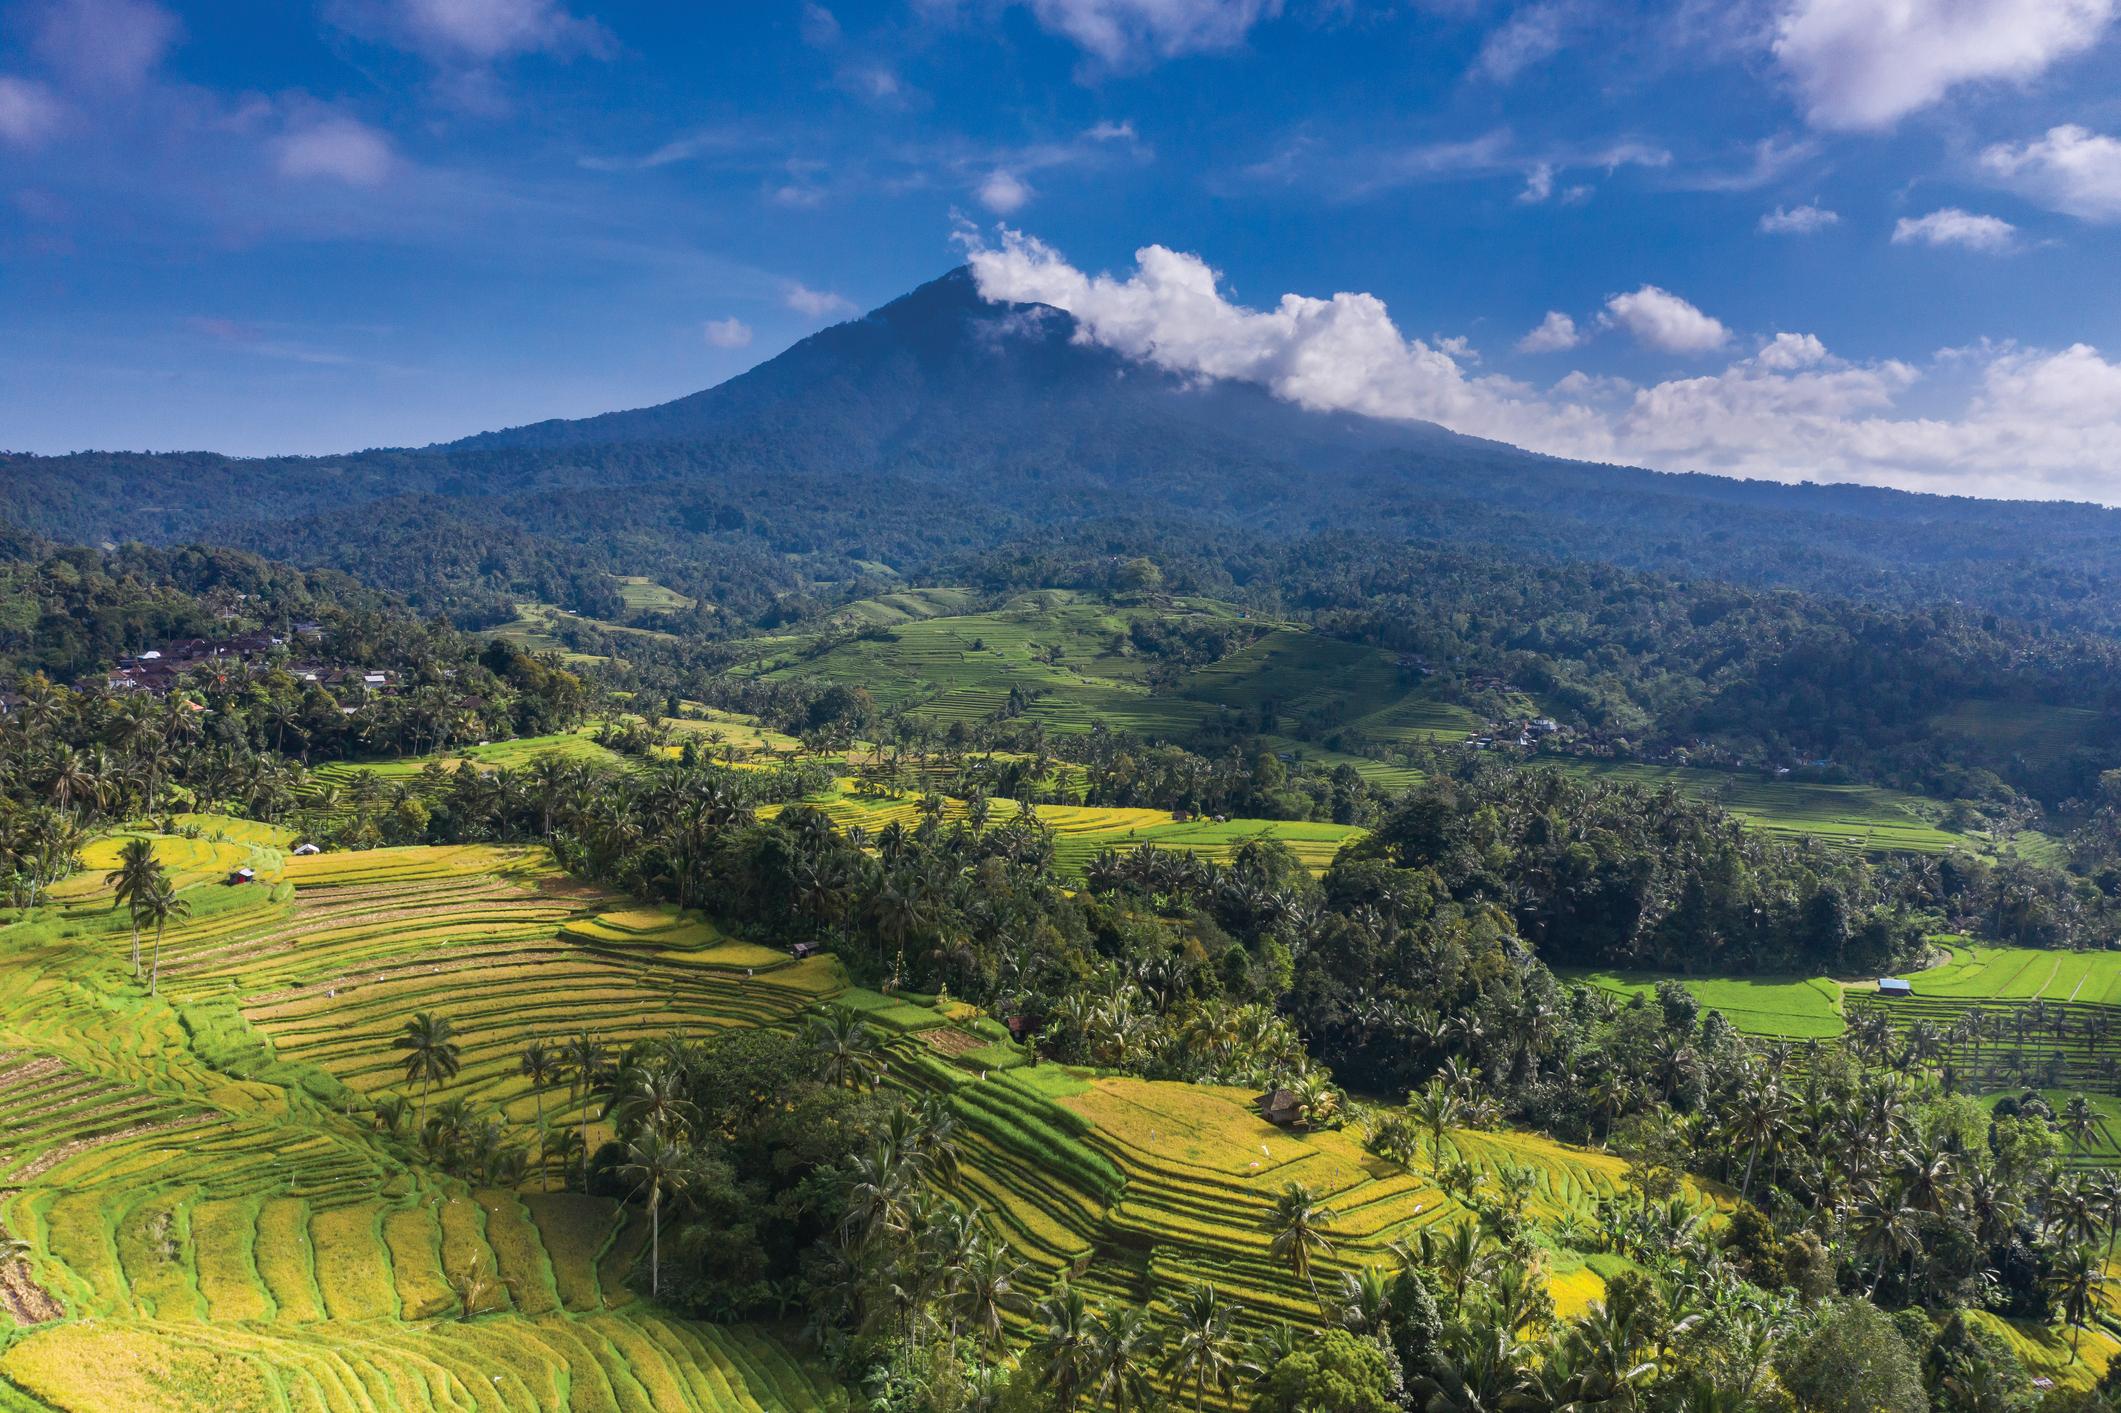 Rice paddy fields in the shadow of Batukaru Volcano. Photo: Getty.